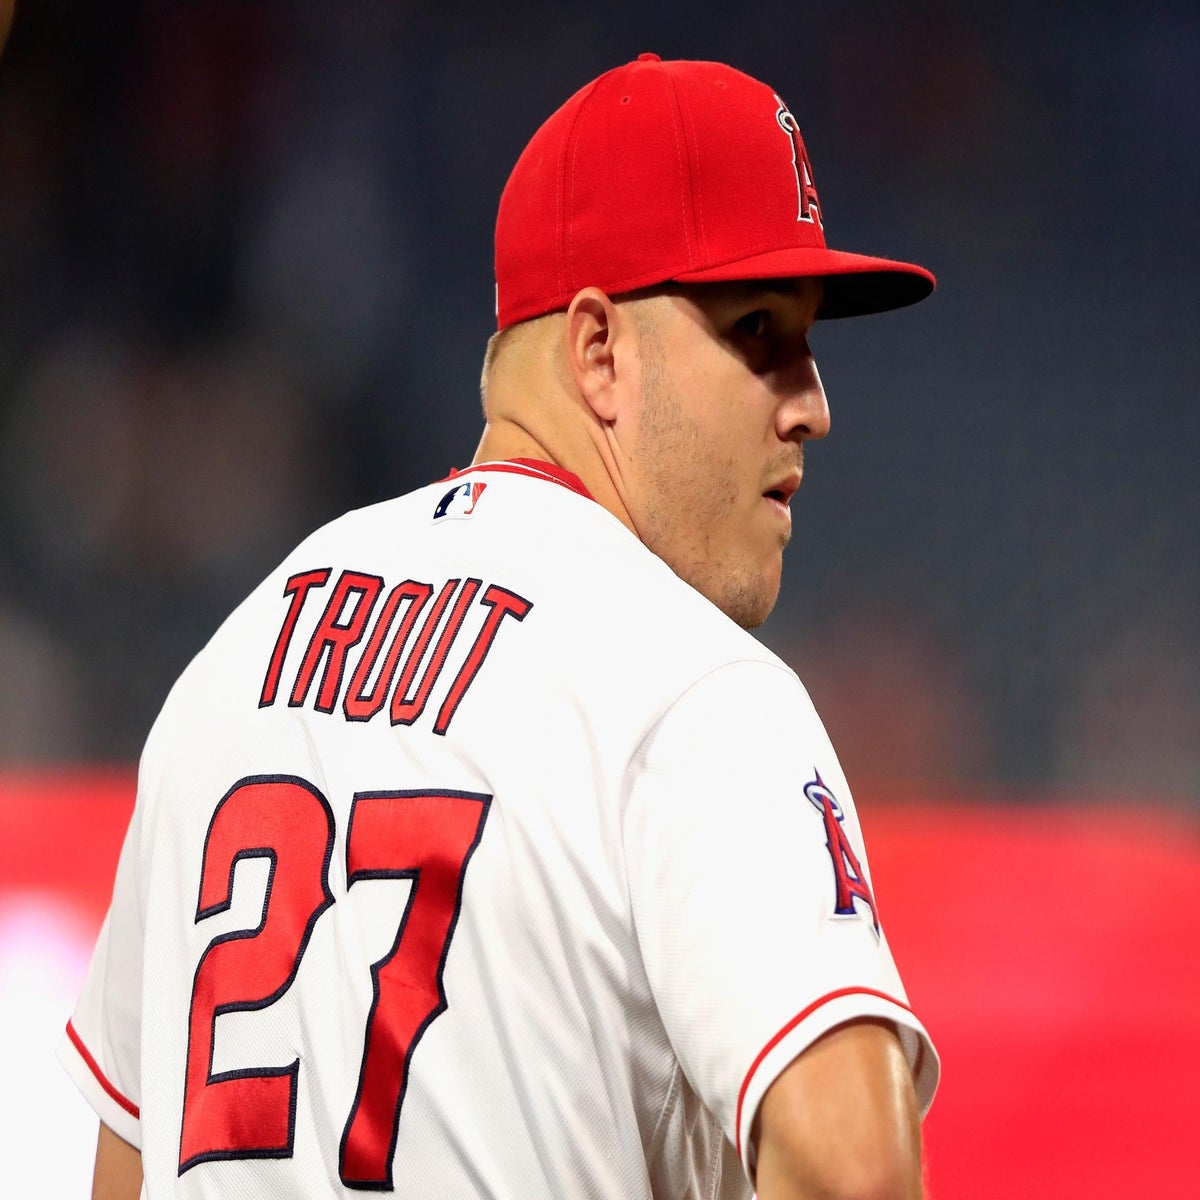 MaxPreps - Mike Trout just signed the largest contract in